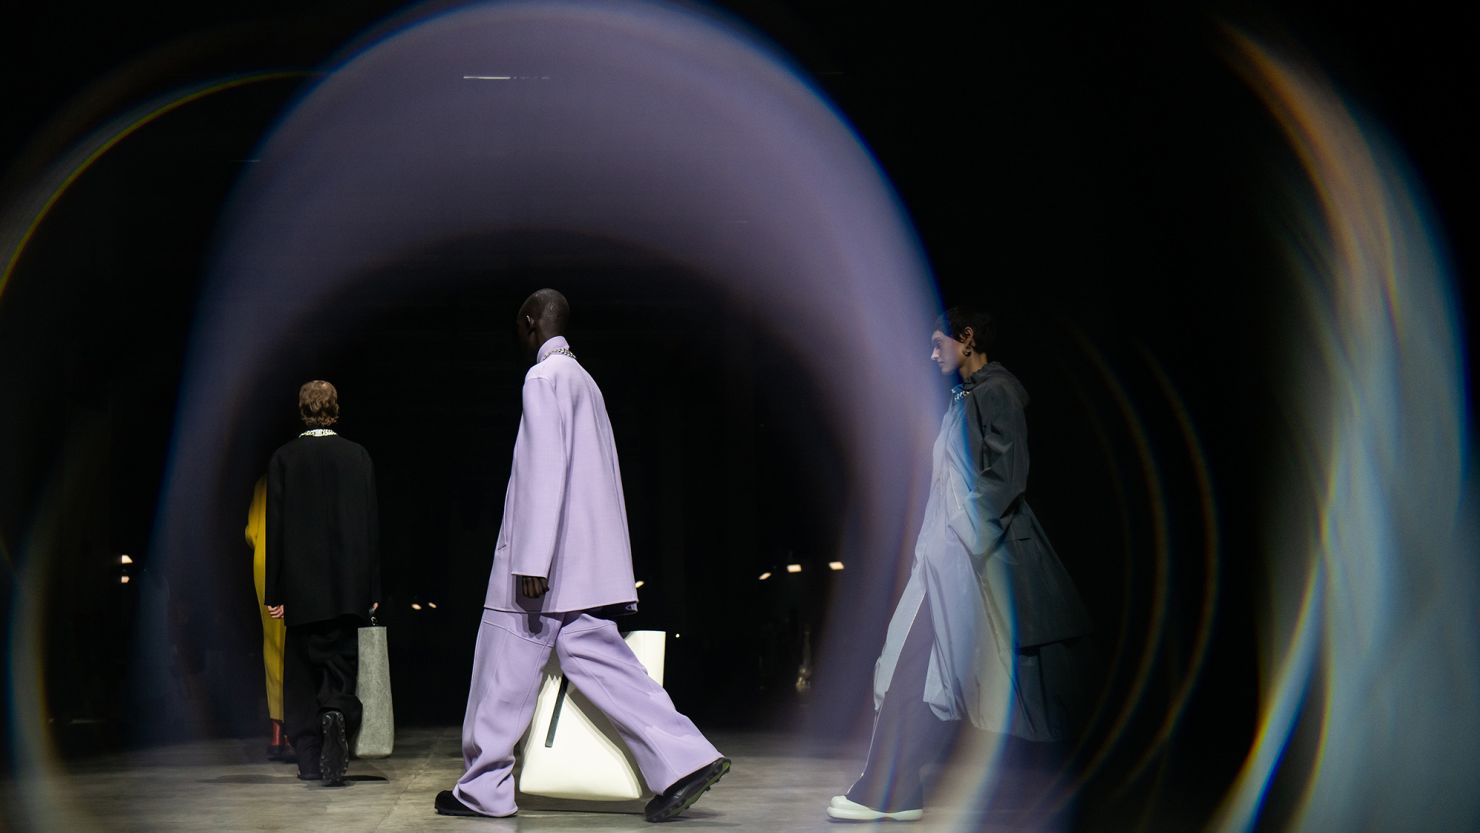 MILAN, ITALY - FEBRUARY 24: (EDITOR'S NOTE: Special filter was used to create this image.) Models walk the runway at the Jil Sander fashion show during the Milan Fashion Week Womenswear Fall/Winter 2023/2024 on February 24, 2023 in Milan, Italy. (Photo by Justin Shin/Getty Images)